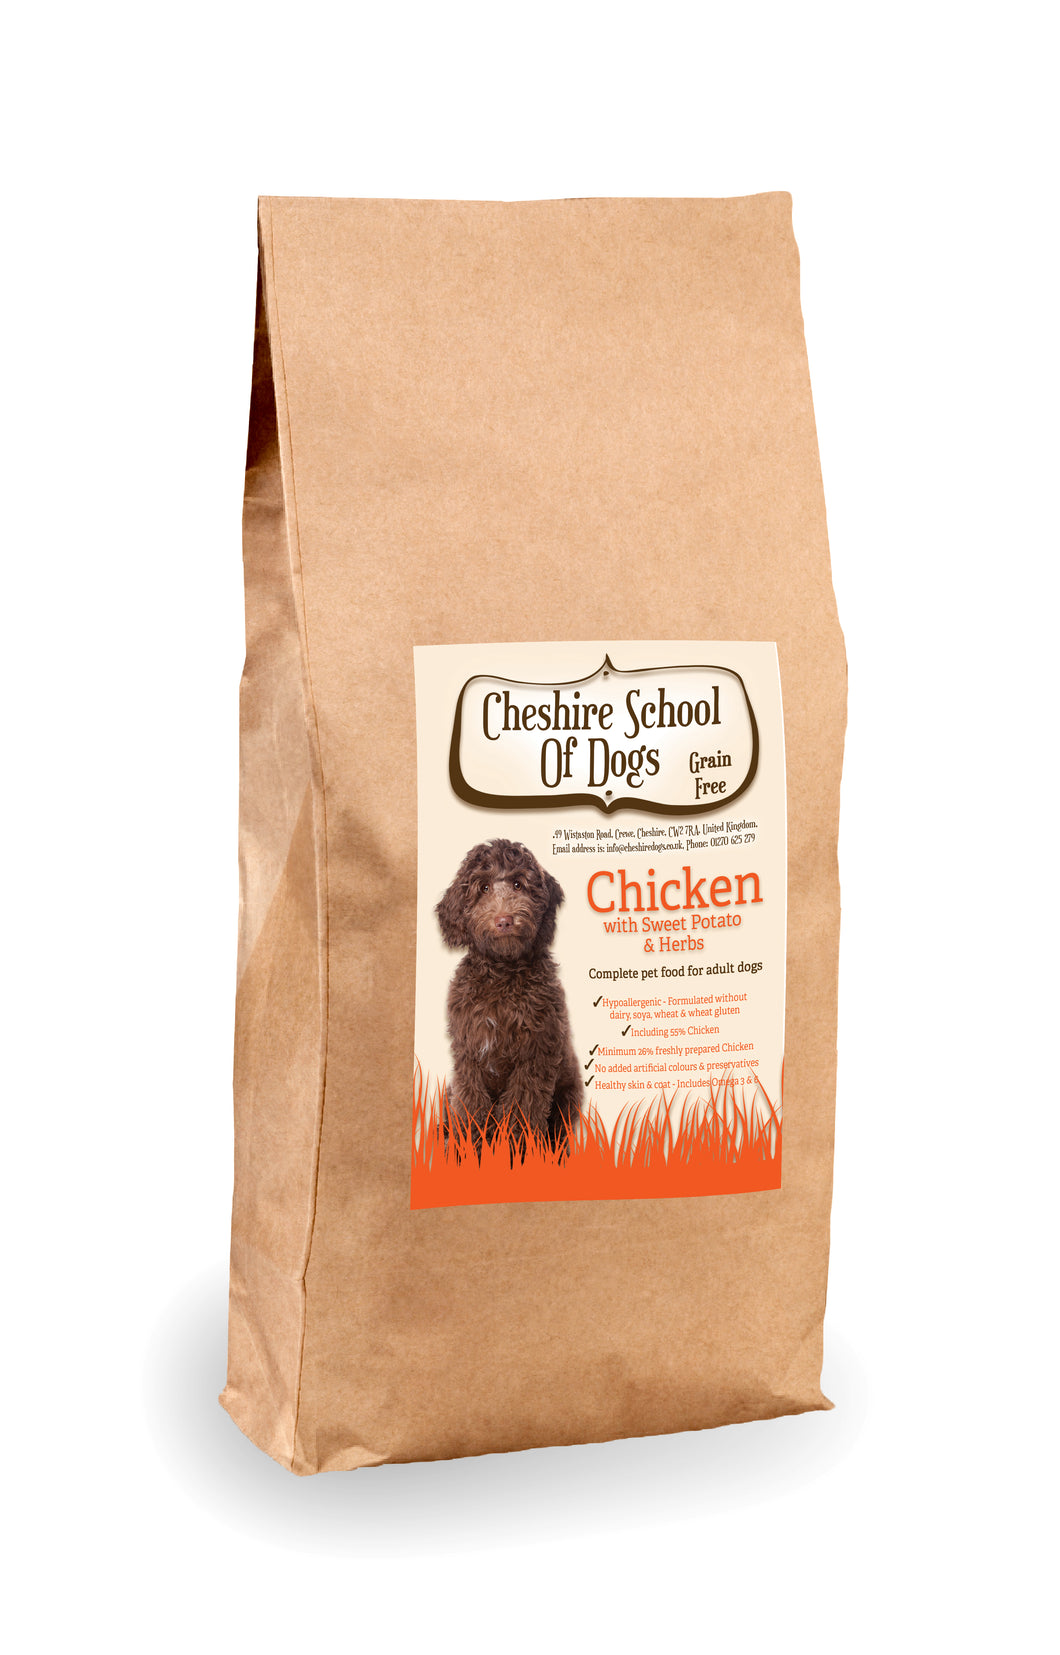 Grain Free - Chicken with Sweet Potato & Herbs - Complete ADULT dog food.